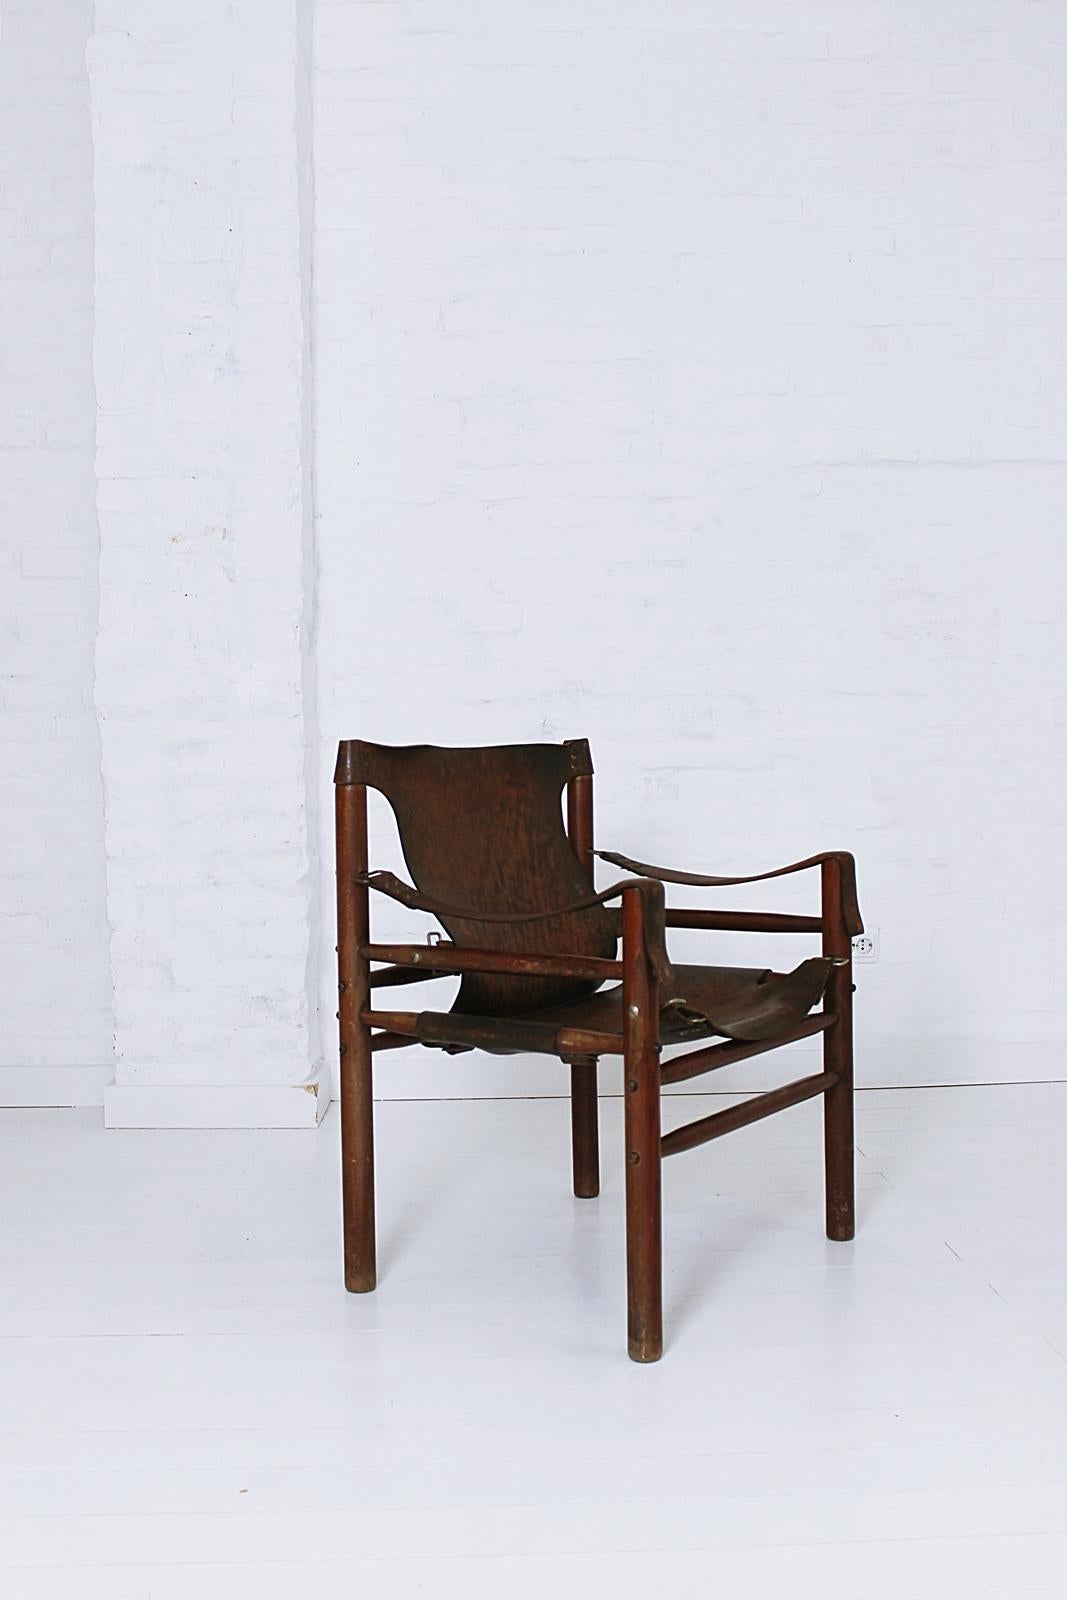 Original and unique vintage safari chair in the manner of Swedish furniture designer, Arne Norell, from the same period, it was manufactured, circa 1970s in Hungary.

Made of high quality materials, thick leather with beautiful hand-stitching